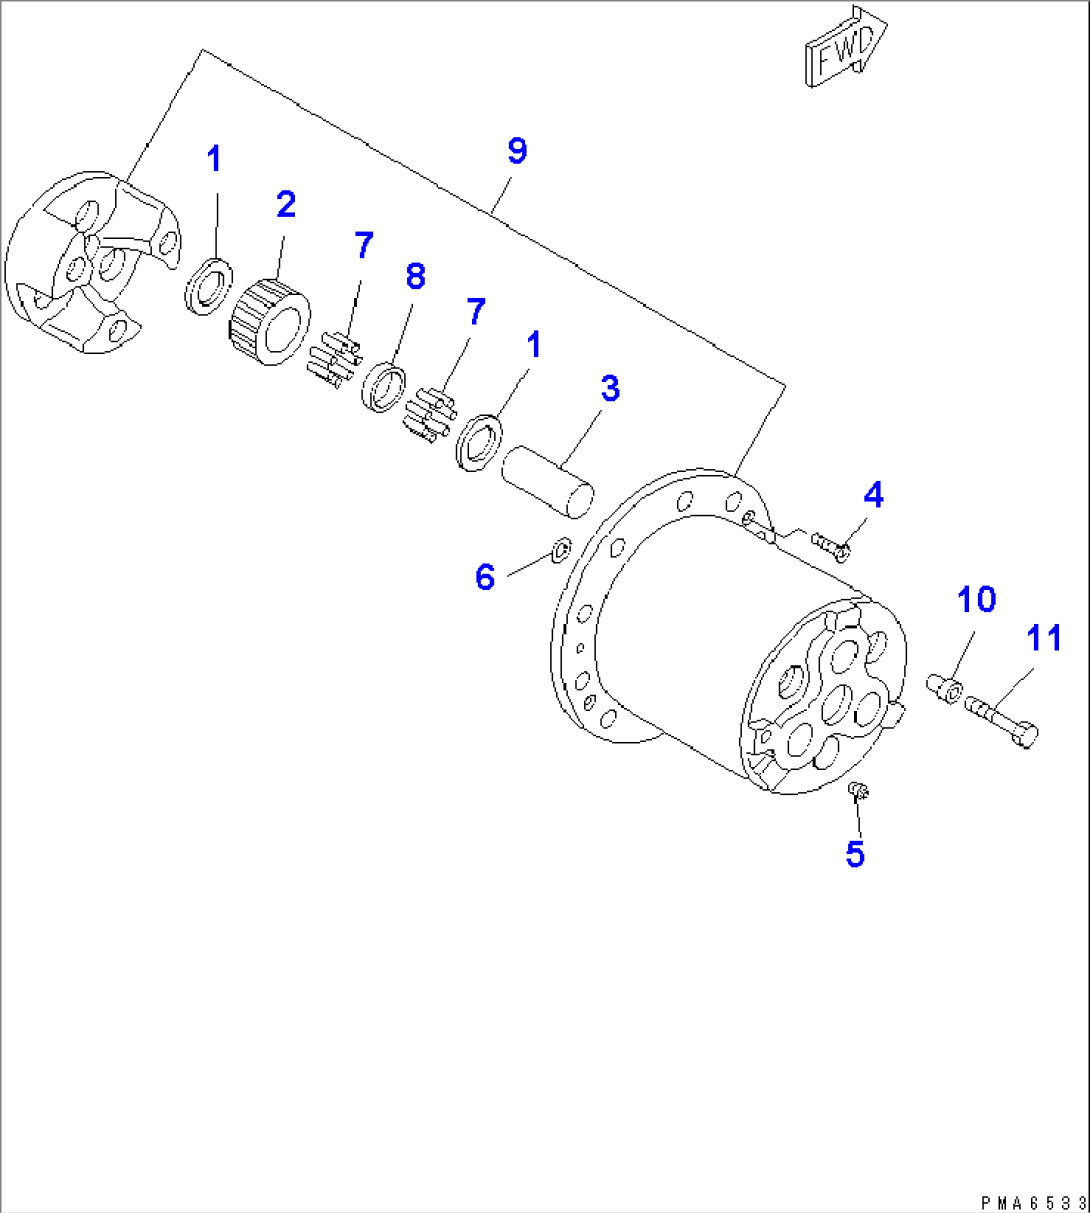 FRONT AXLE (REDUCTION GEAR)